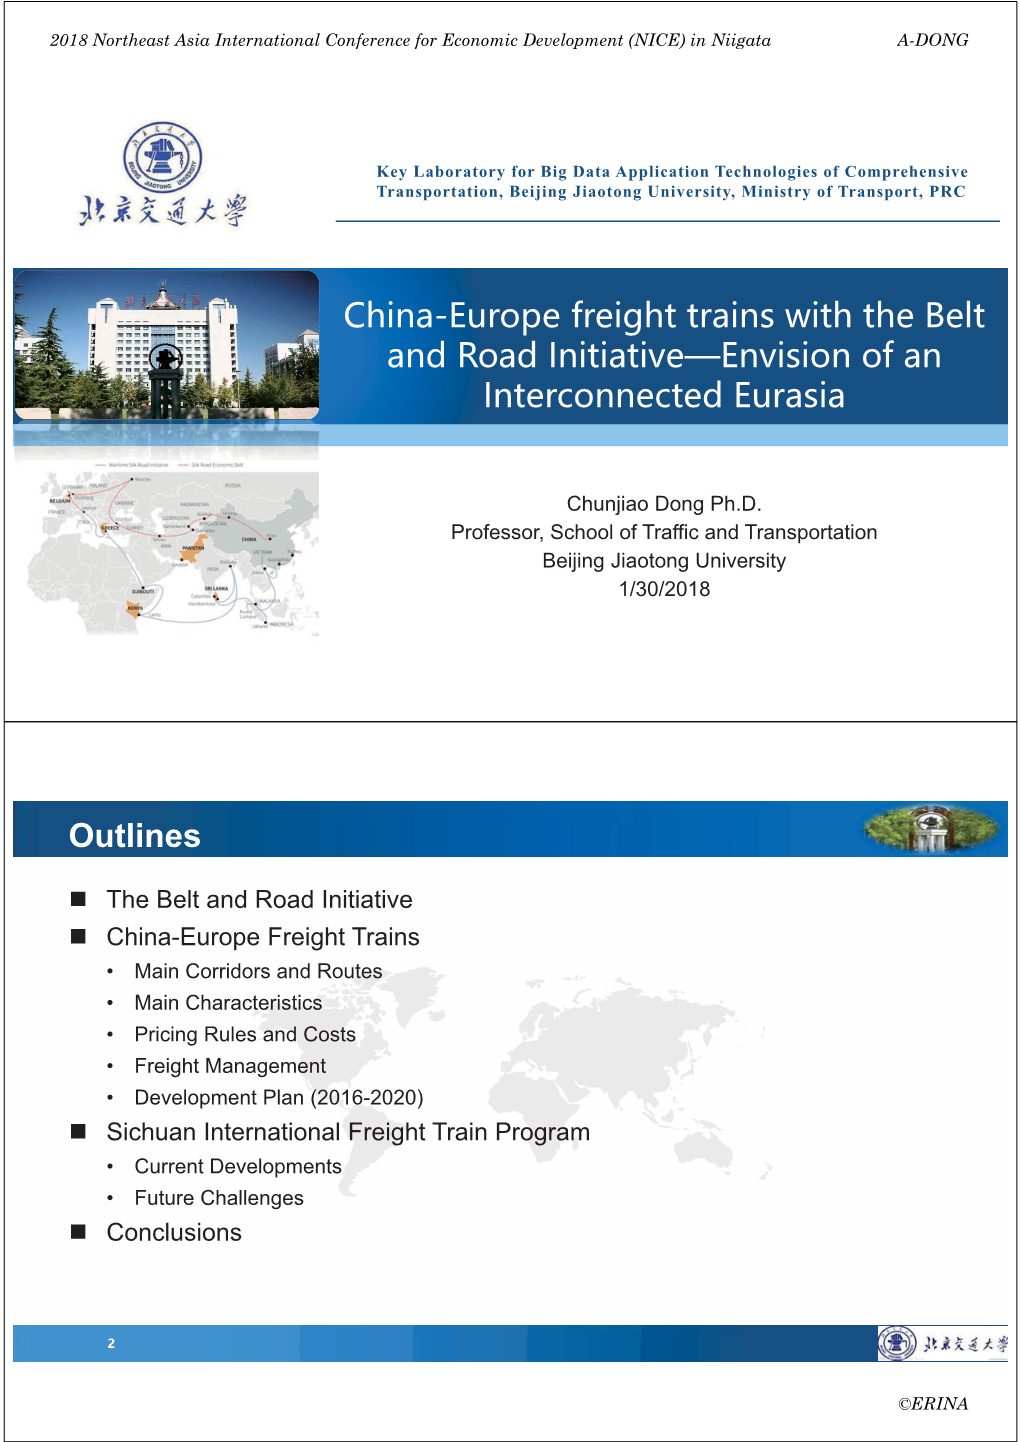 China-Europe Freight Trains with the Belt and Road Initiative